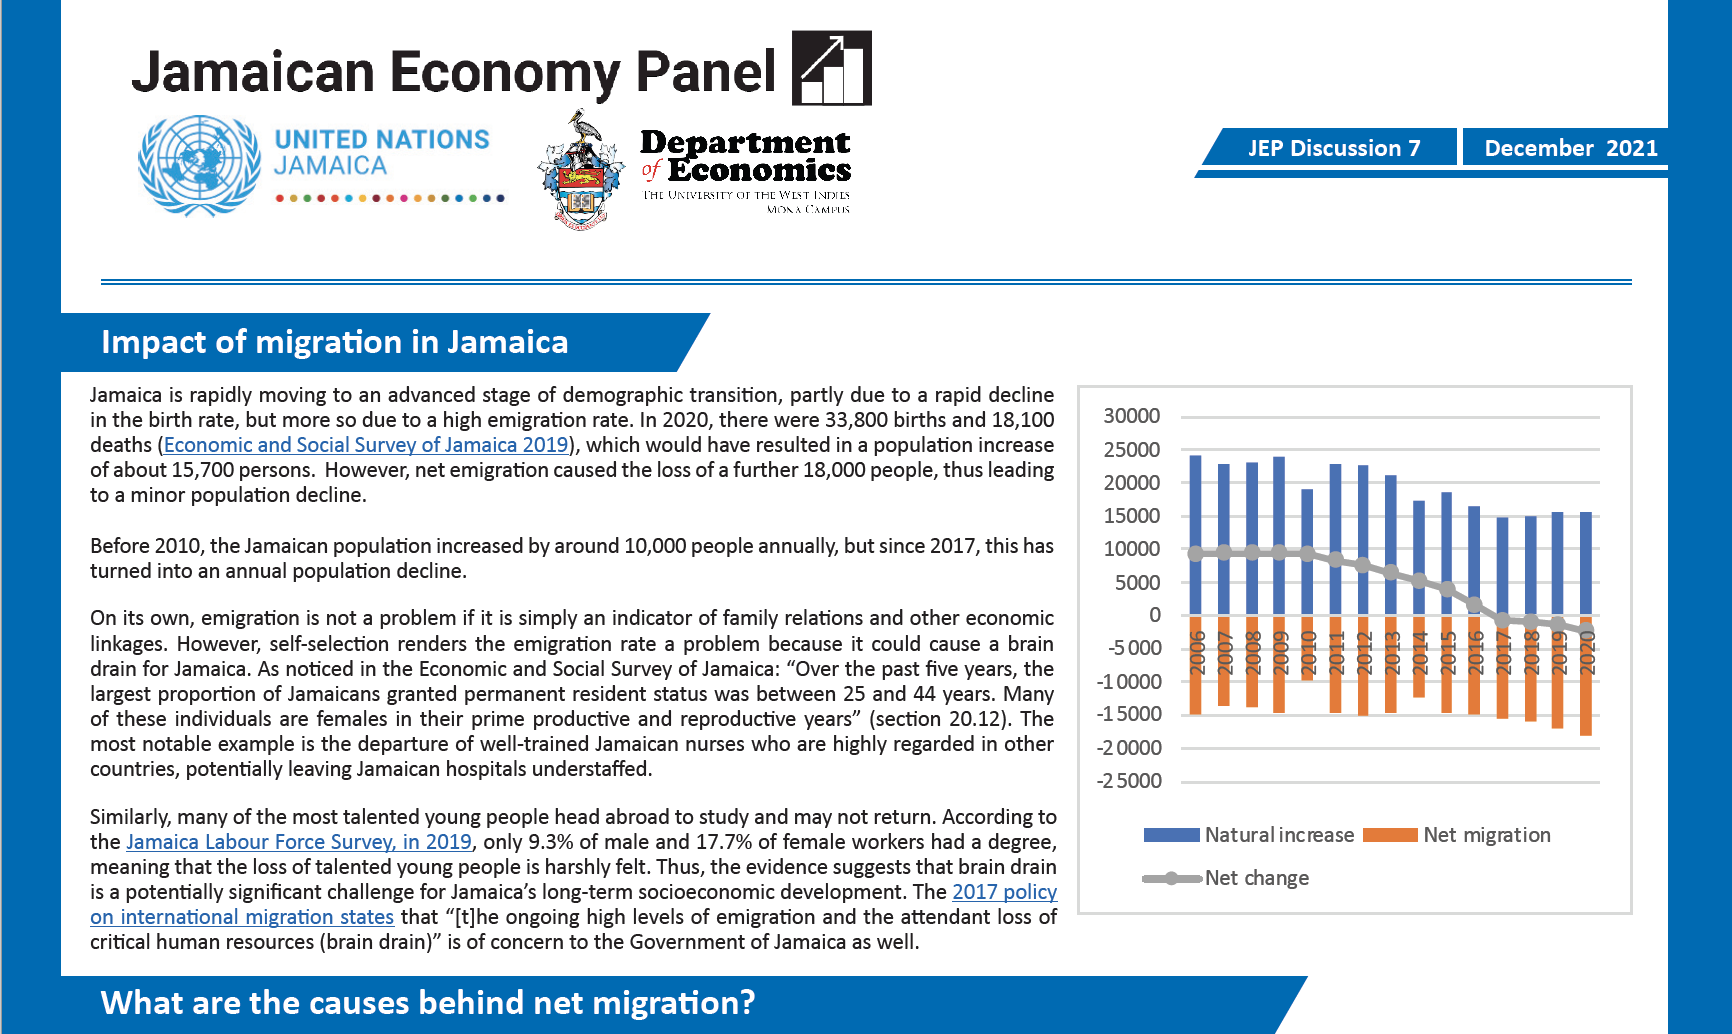 Jamaican Economy Panel discusses high levels of emigration from Jamaica